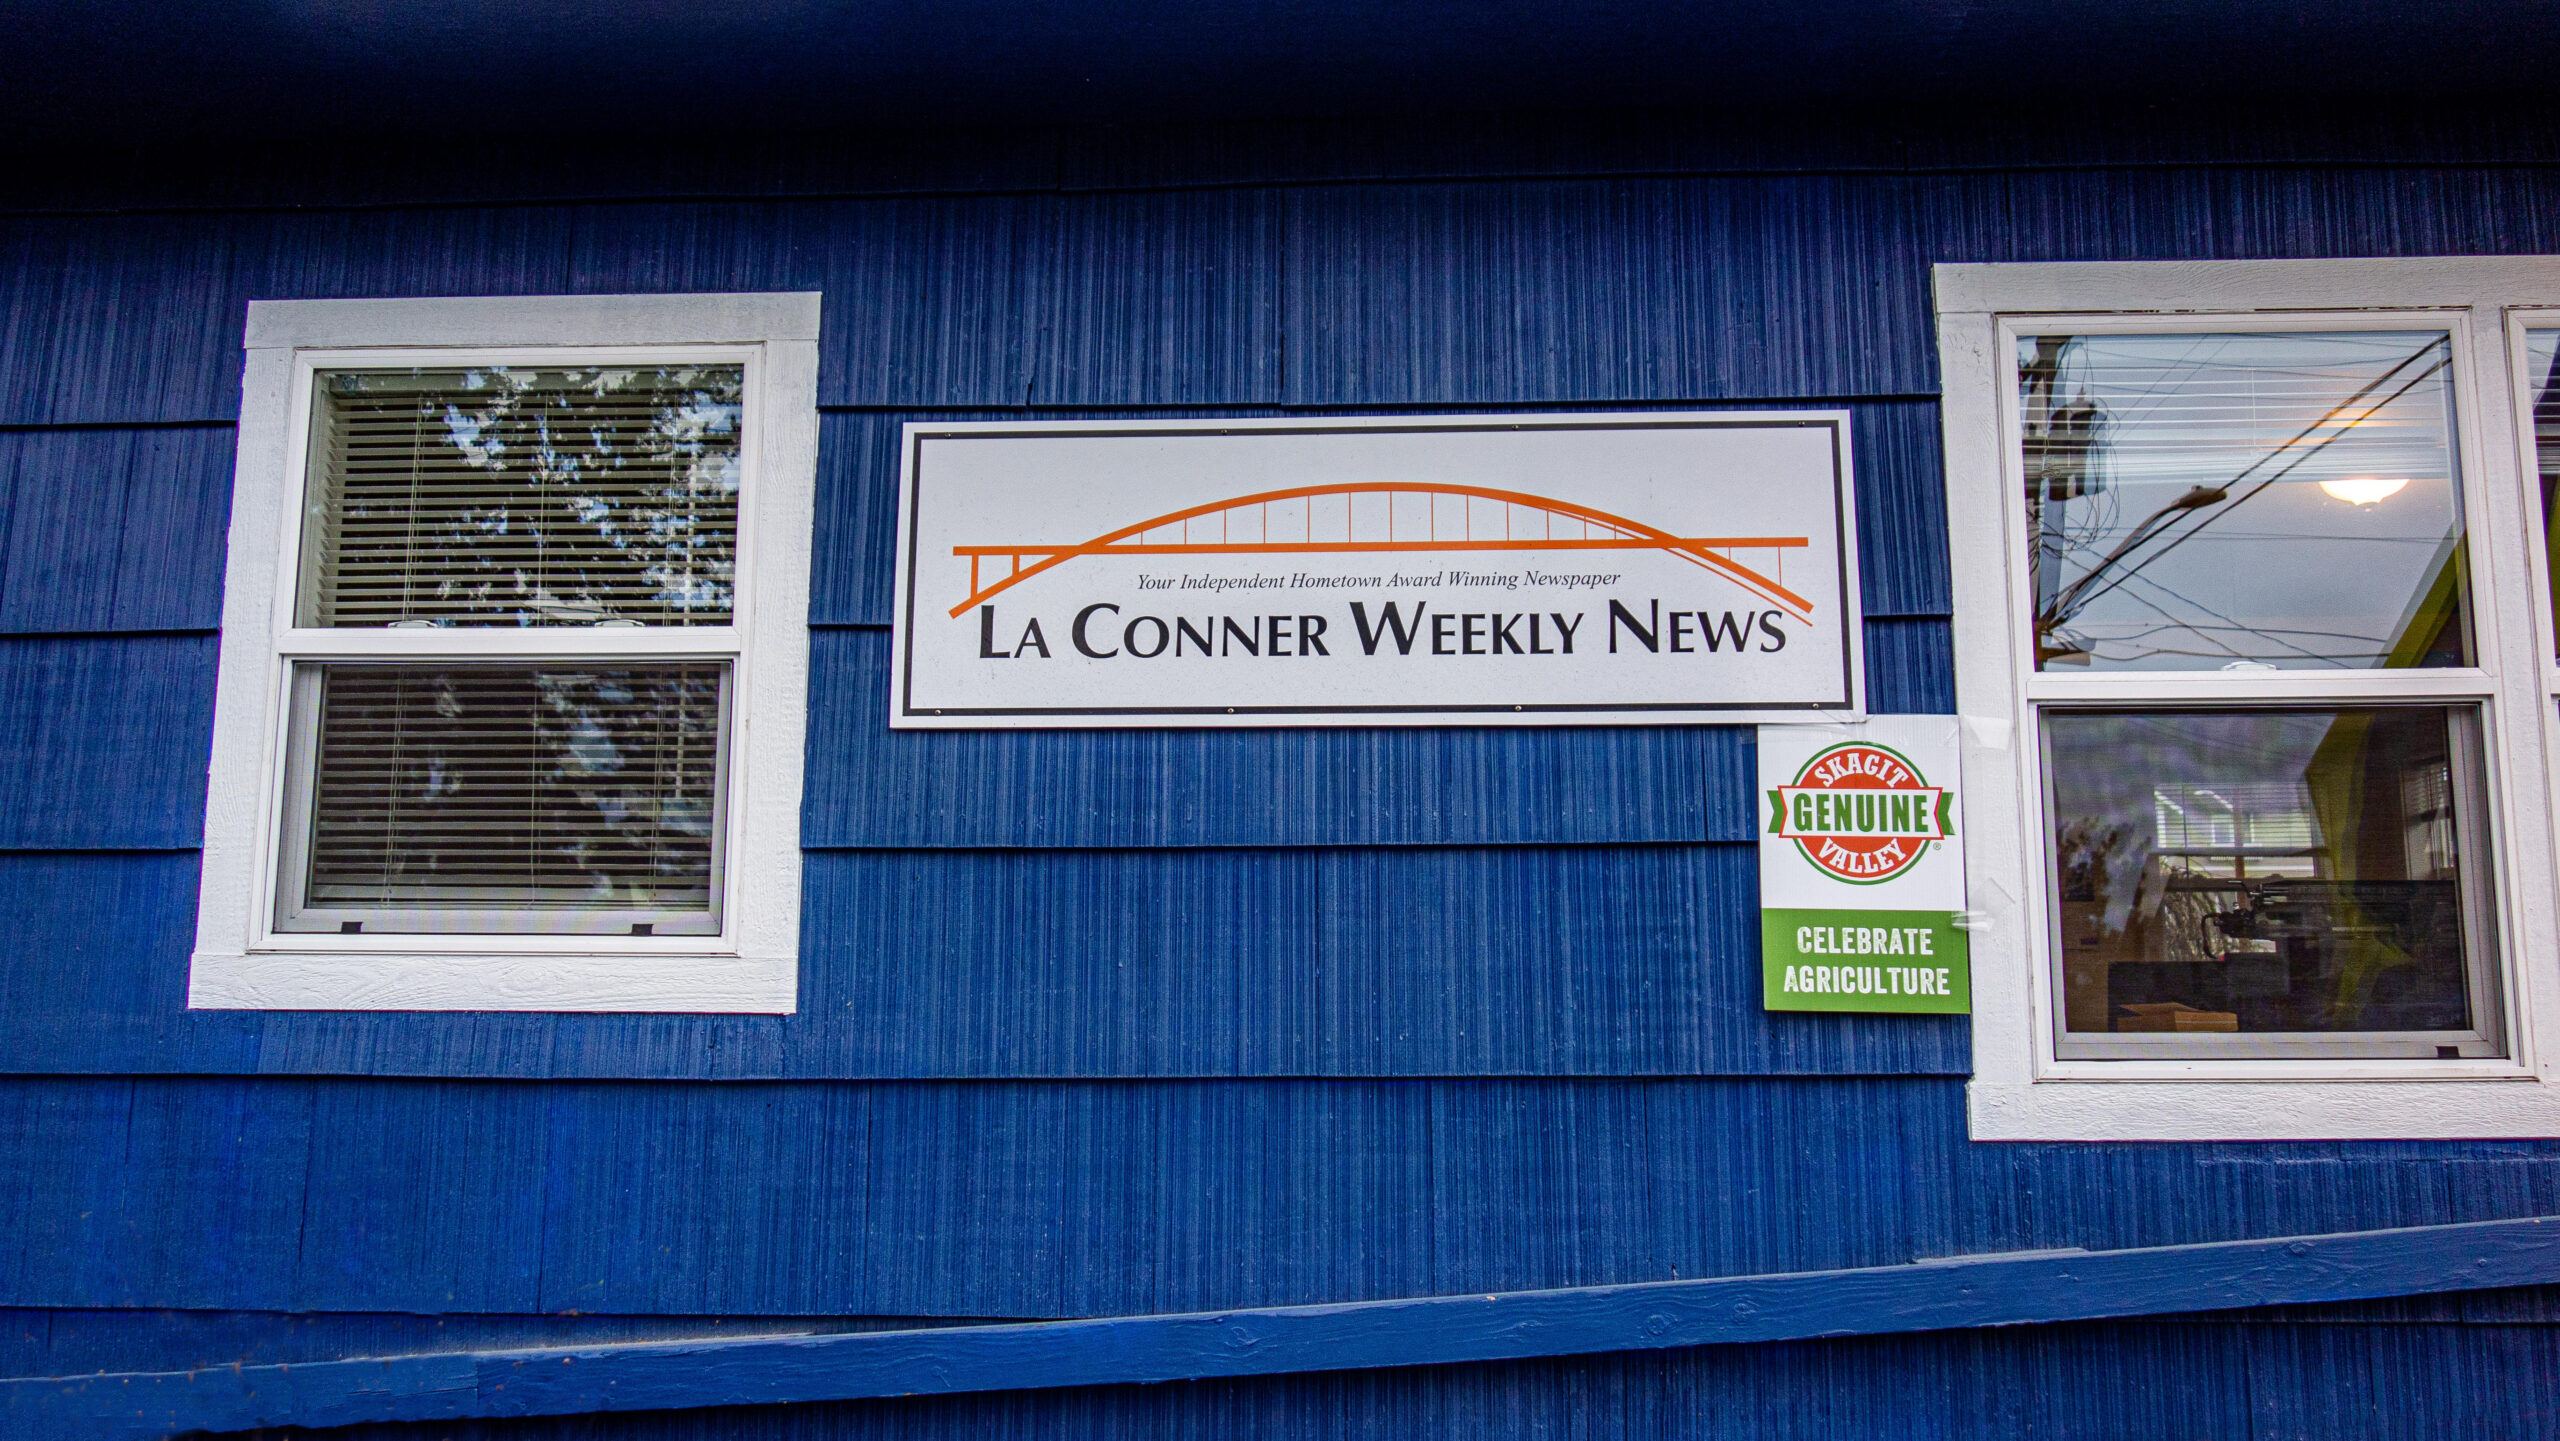 The La Conner Weekly News